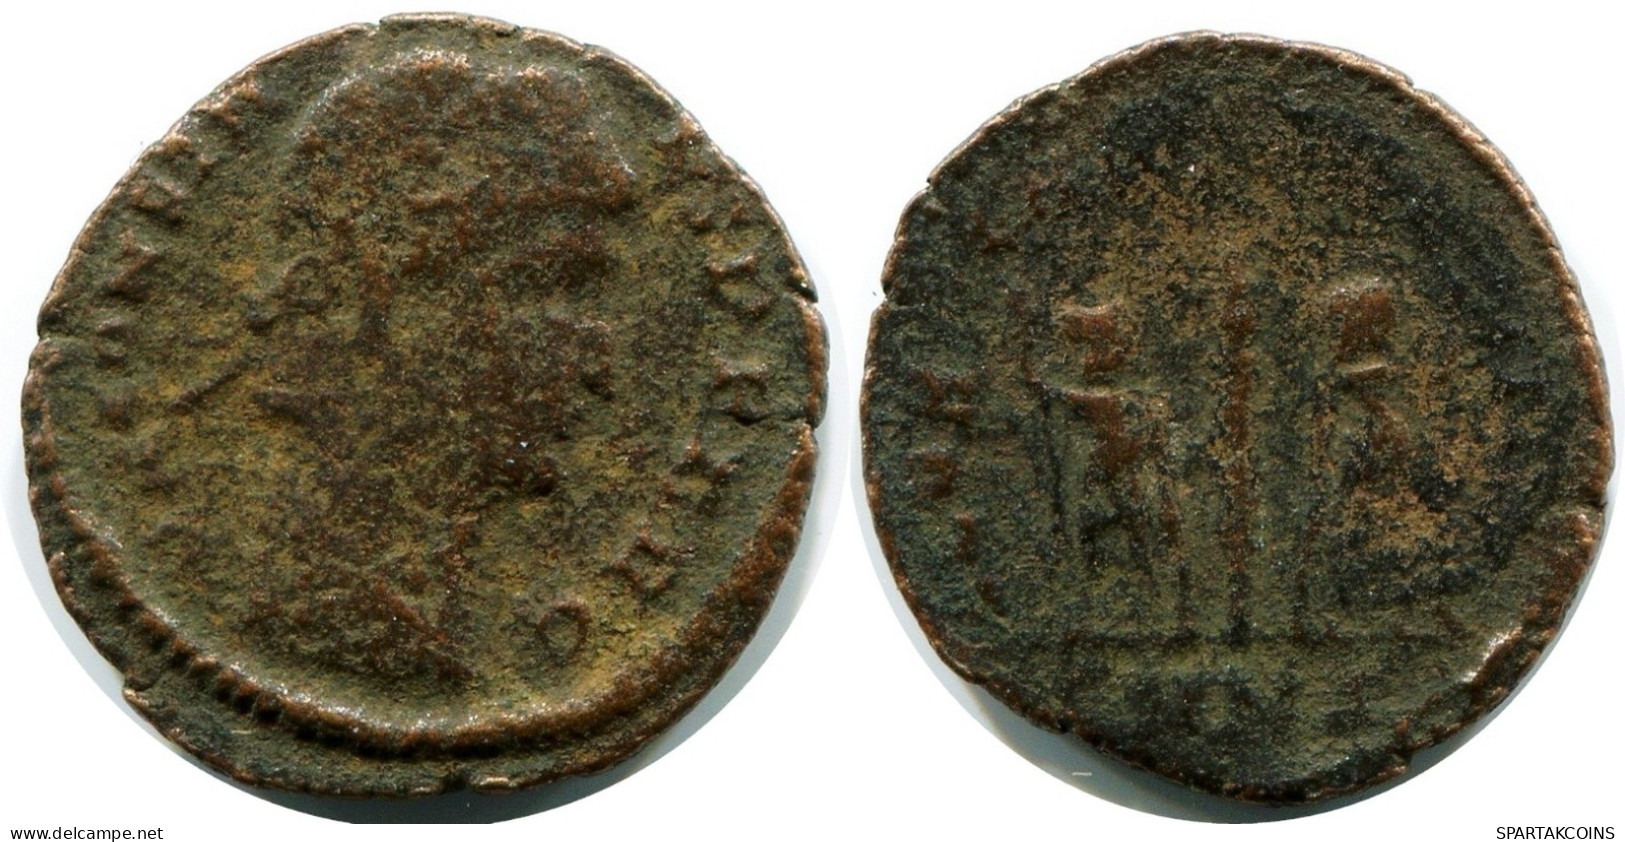 CONSTANS MINTED IN NICOMEDIA FROM THE ROYAL ONTARIO MUSEUM #ANC11739.14.E.A - The Christian Empire (307 AD Tot 363 AD)